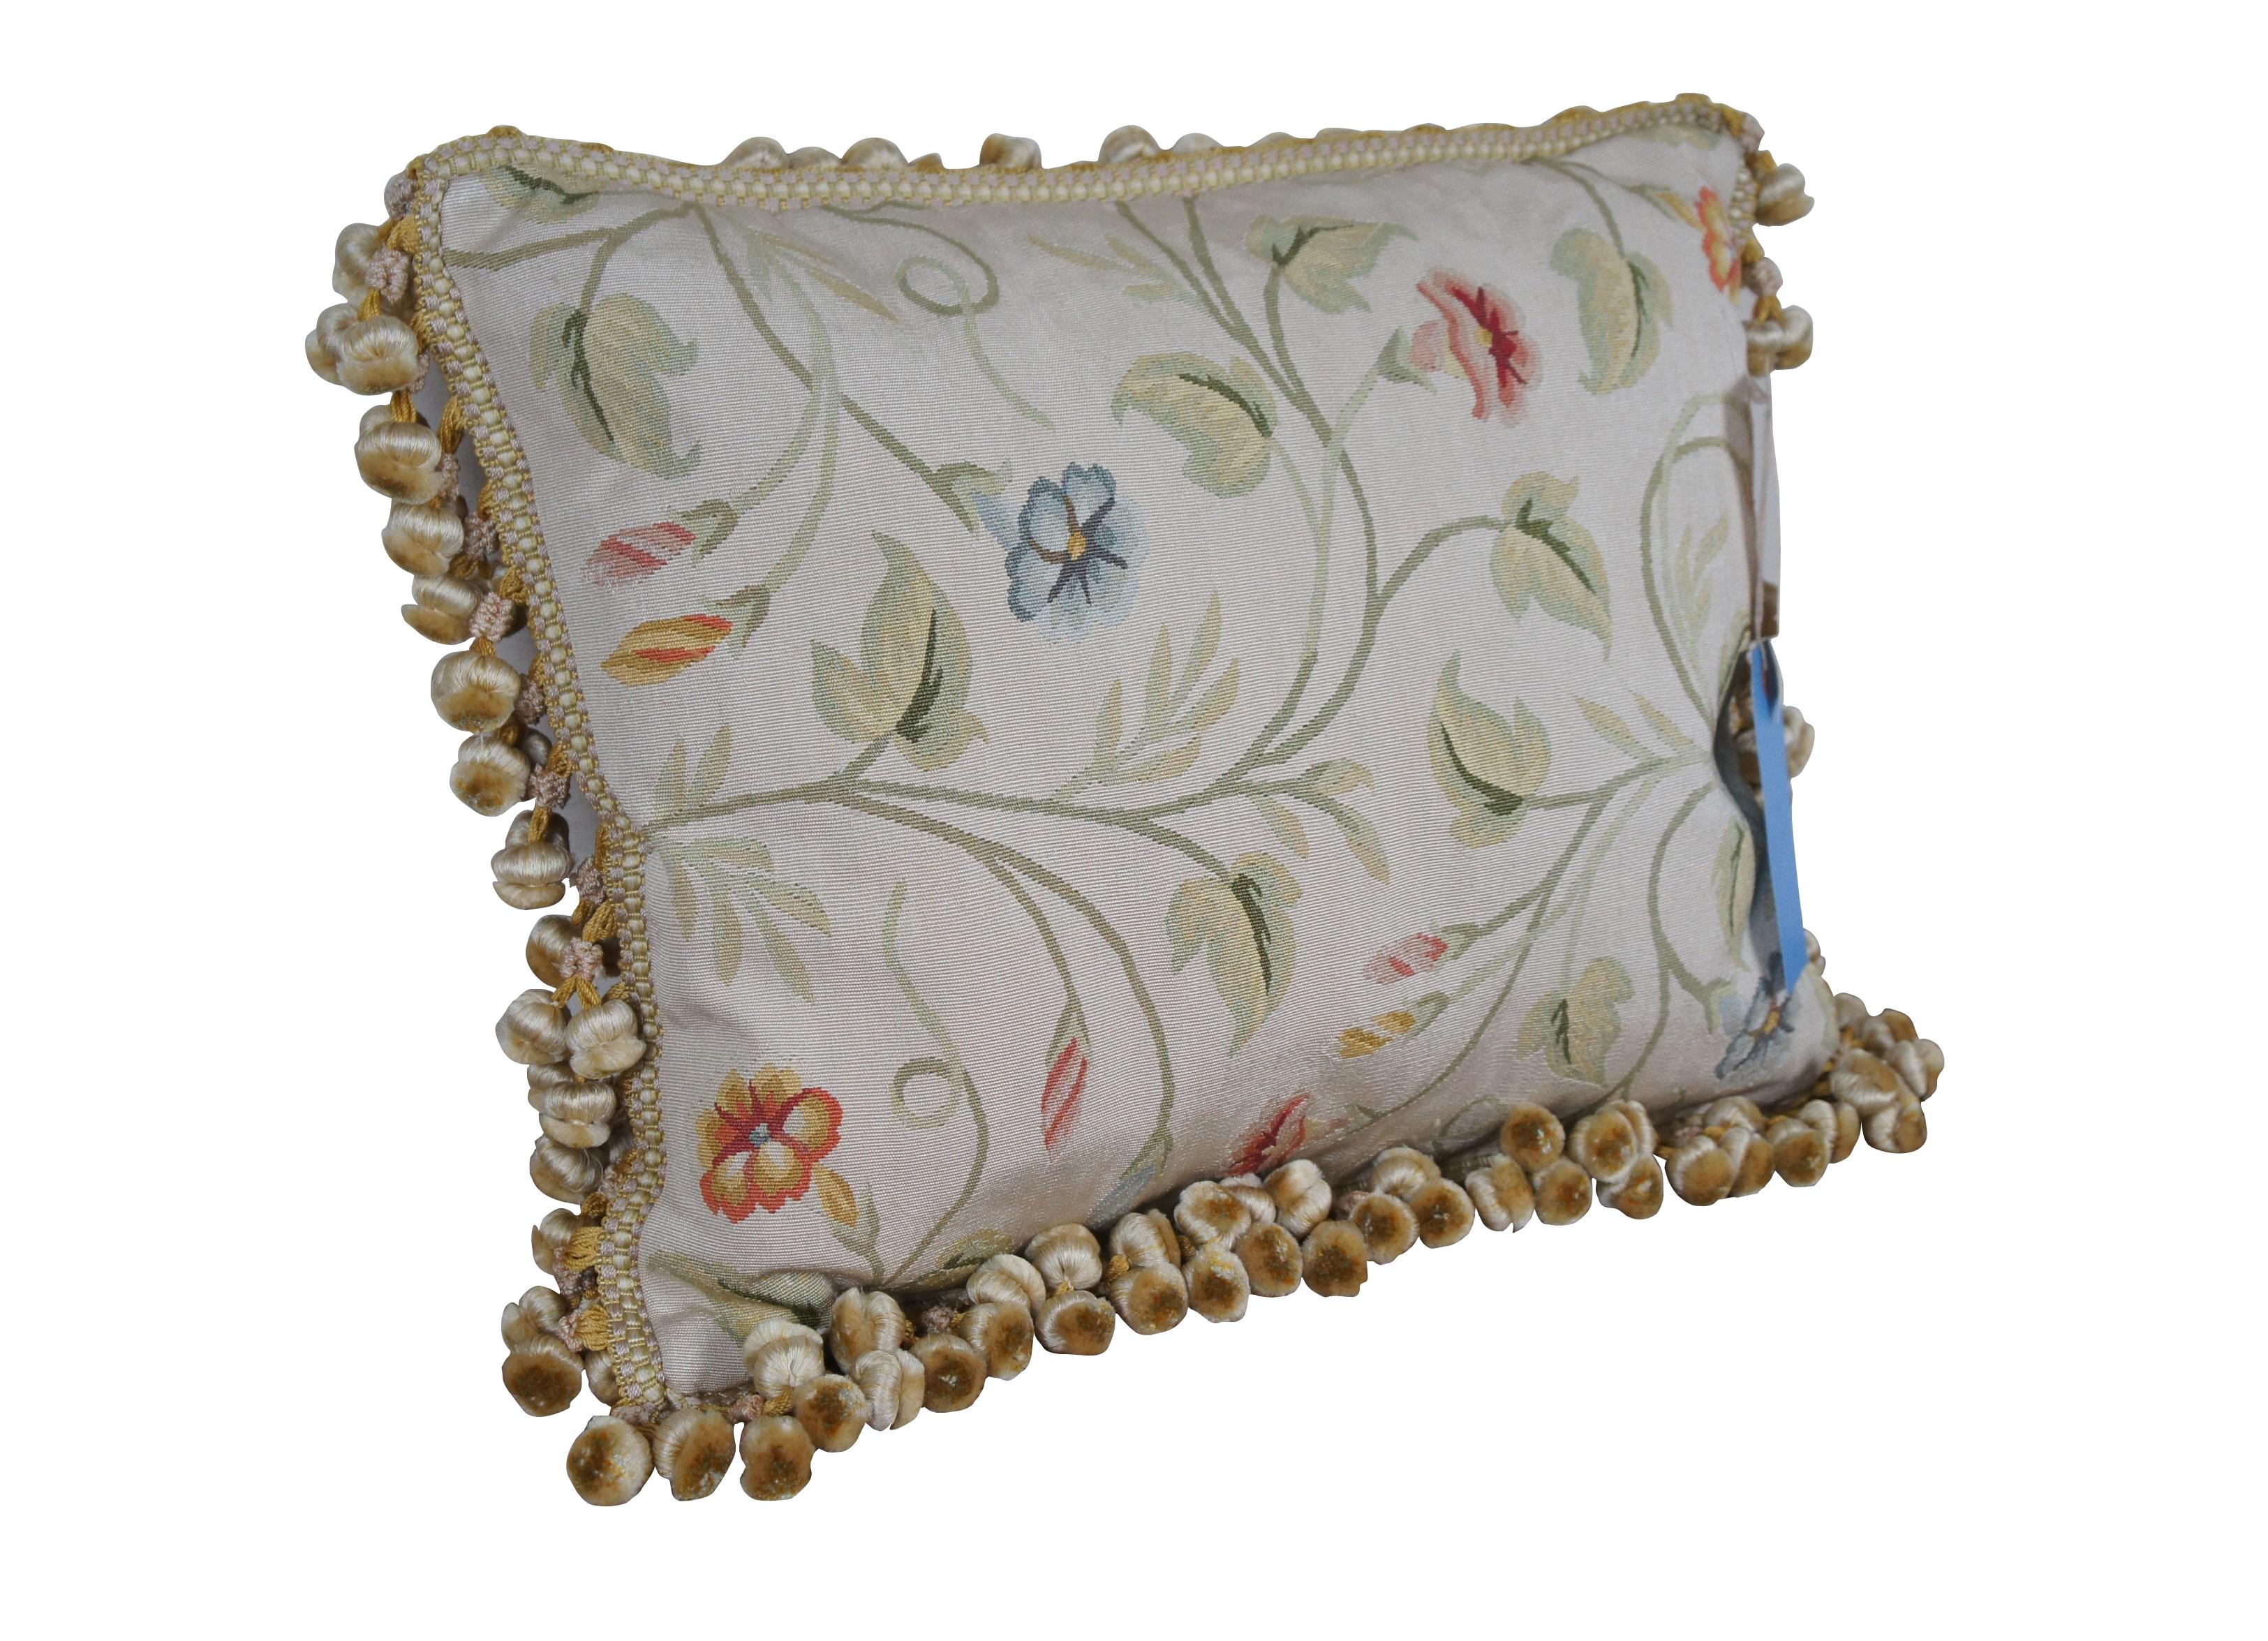 2 Available - 20th century rectangular lumbar / throw pillow, machine embroidered in silk with twisting green leafy stems sporting pink, blue, and orange morning glories. Cream and gold ball tassel trim. Beige velour back with zipper closure. Down